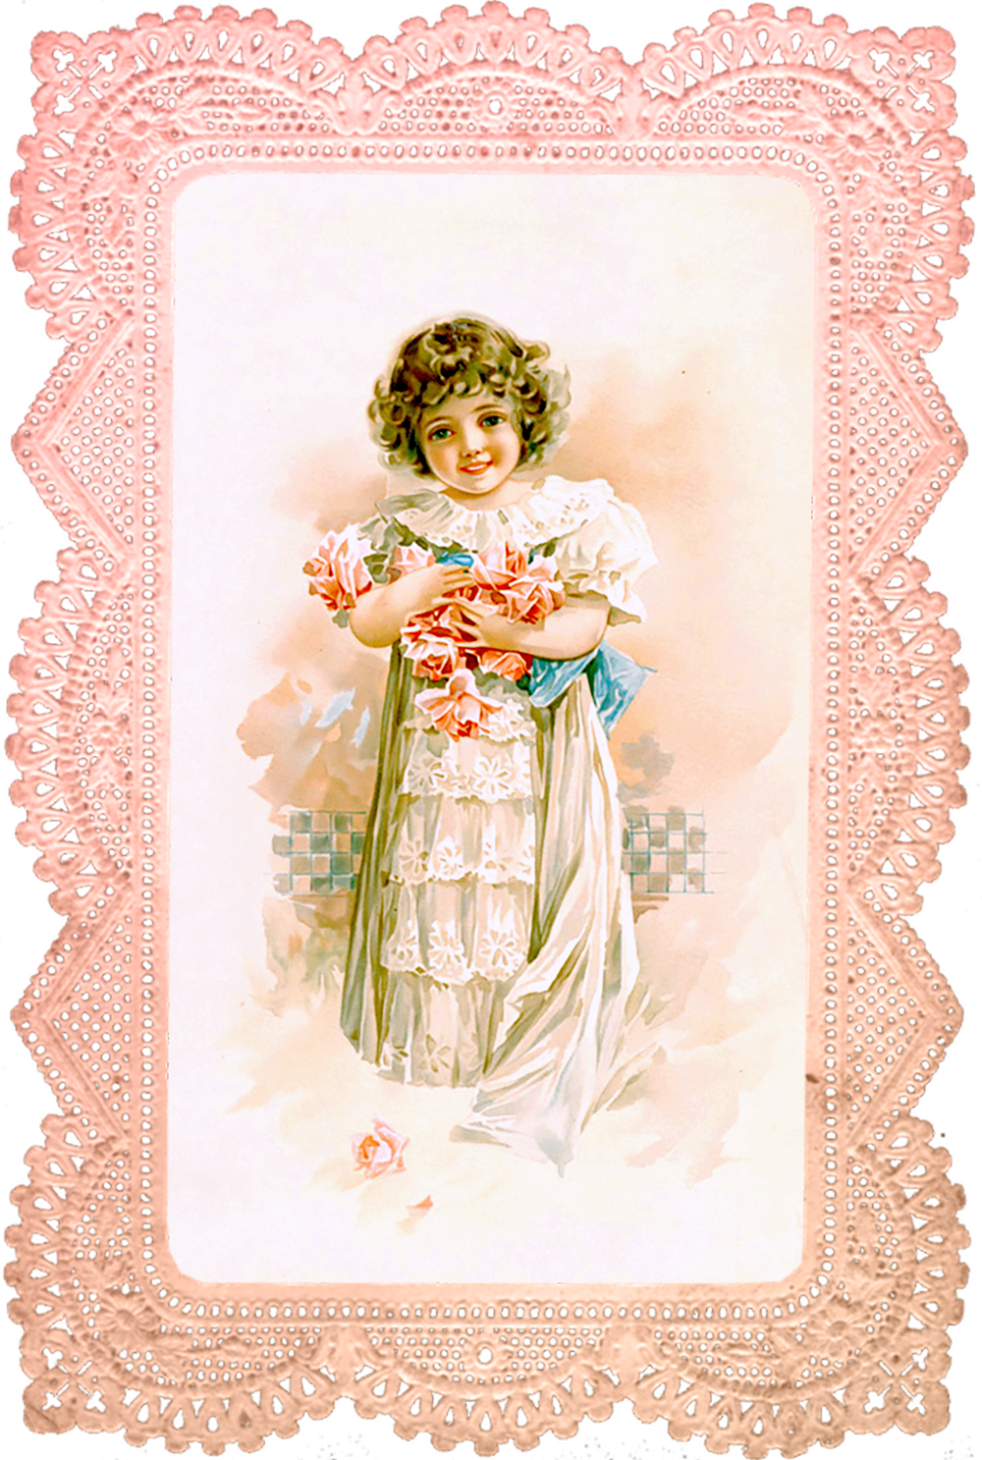 Wings of Whimsy: Rose Girl in Pink Lace Frame - No 1 of 2 #vintage #ephemera #freebie #printable  #lace #rose #girl #png